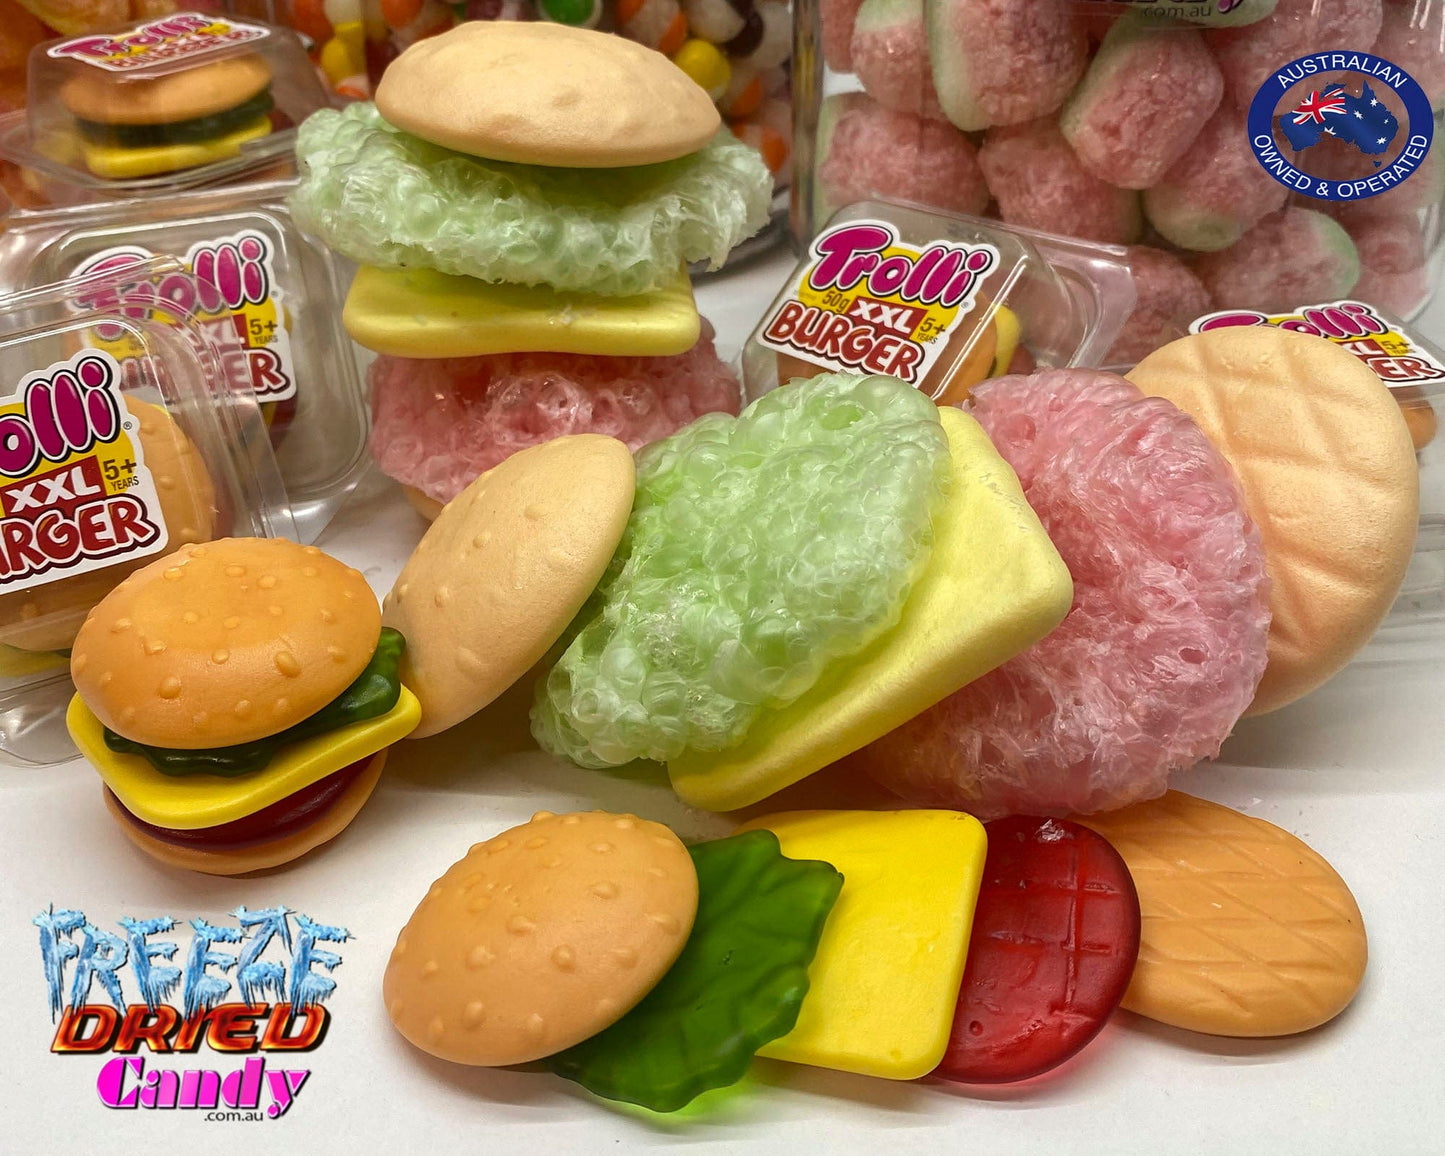 Freeze Dried  XXL Burger by Trolli | Freeze Dried Candy Lollies Sweets treats. Turns from XXL to a Massive Gaint Crunchy Puffy Burger, and oh so tasty.  Made up of five delicious layers: a bread roll top, salad, cheese, meat, and a bottom bread bun. Each layer is separated and has a different color and fruit flavor. combinations of rhubarb, raspberry, strawberry, pineapple-kiwi-gooseberry with a touch of yoghurt and cream. No-one can resist their original flavour. Bite into one now!